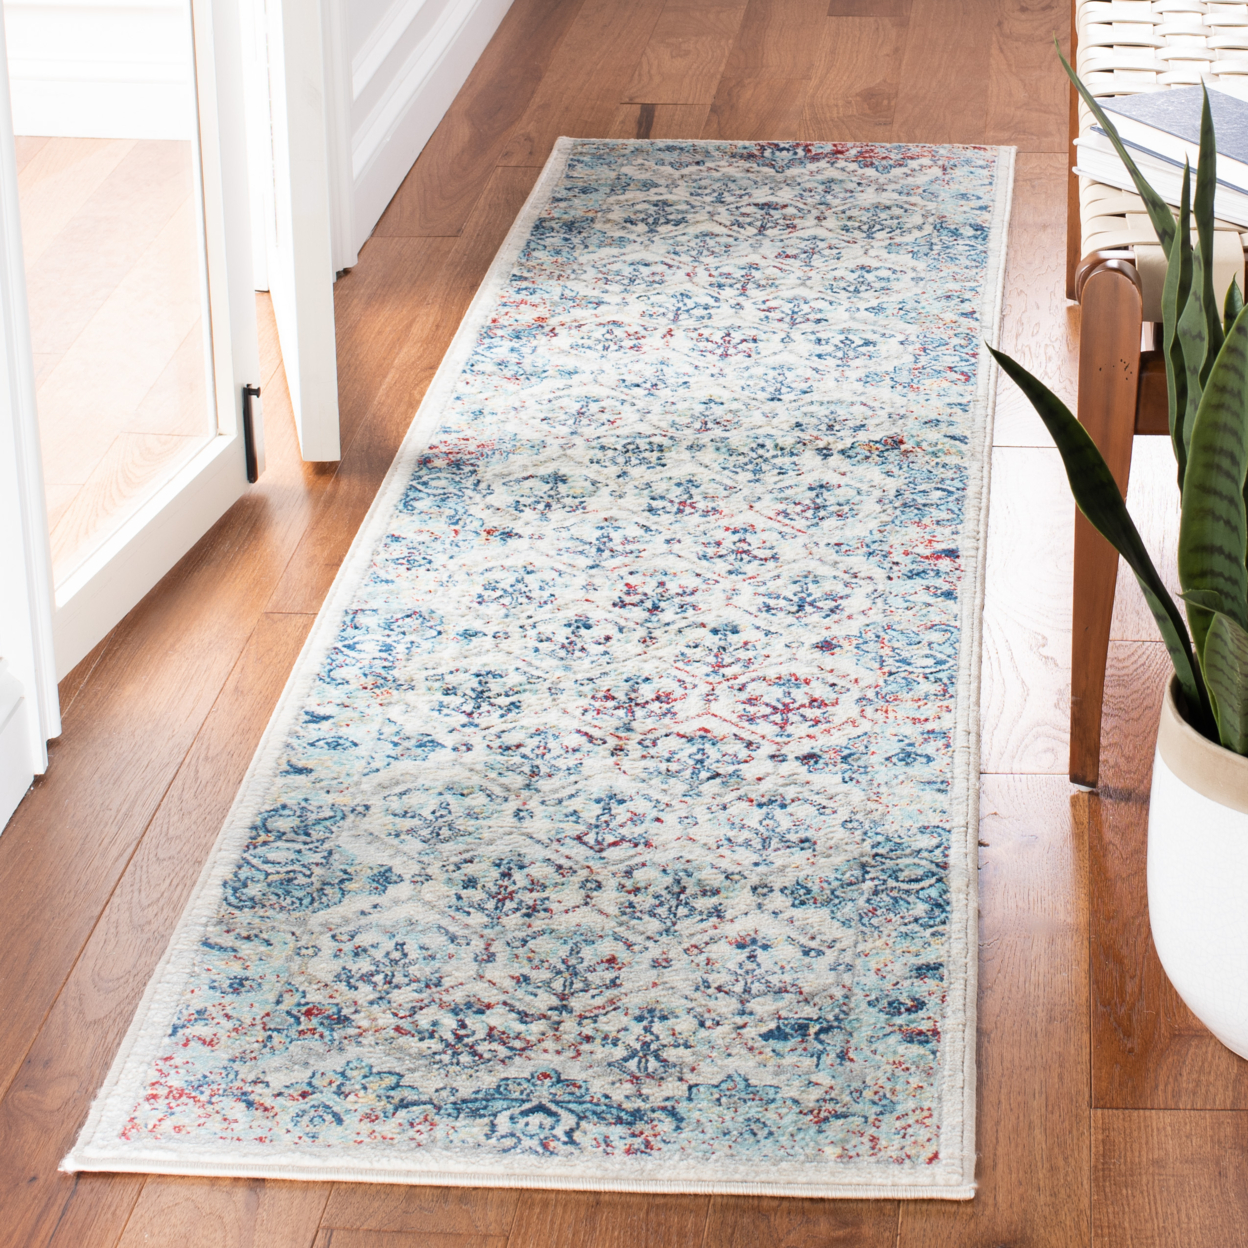 SAFAVIEH Brentwood Collection BNT869A Ivory / Blue Rug - 8 X 10